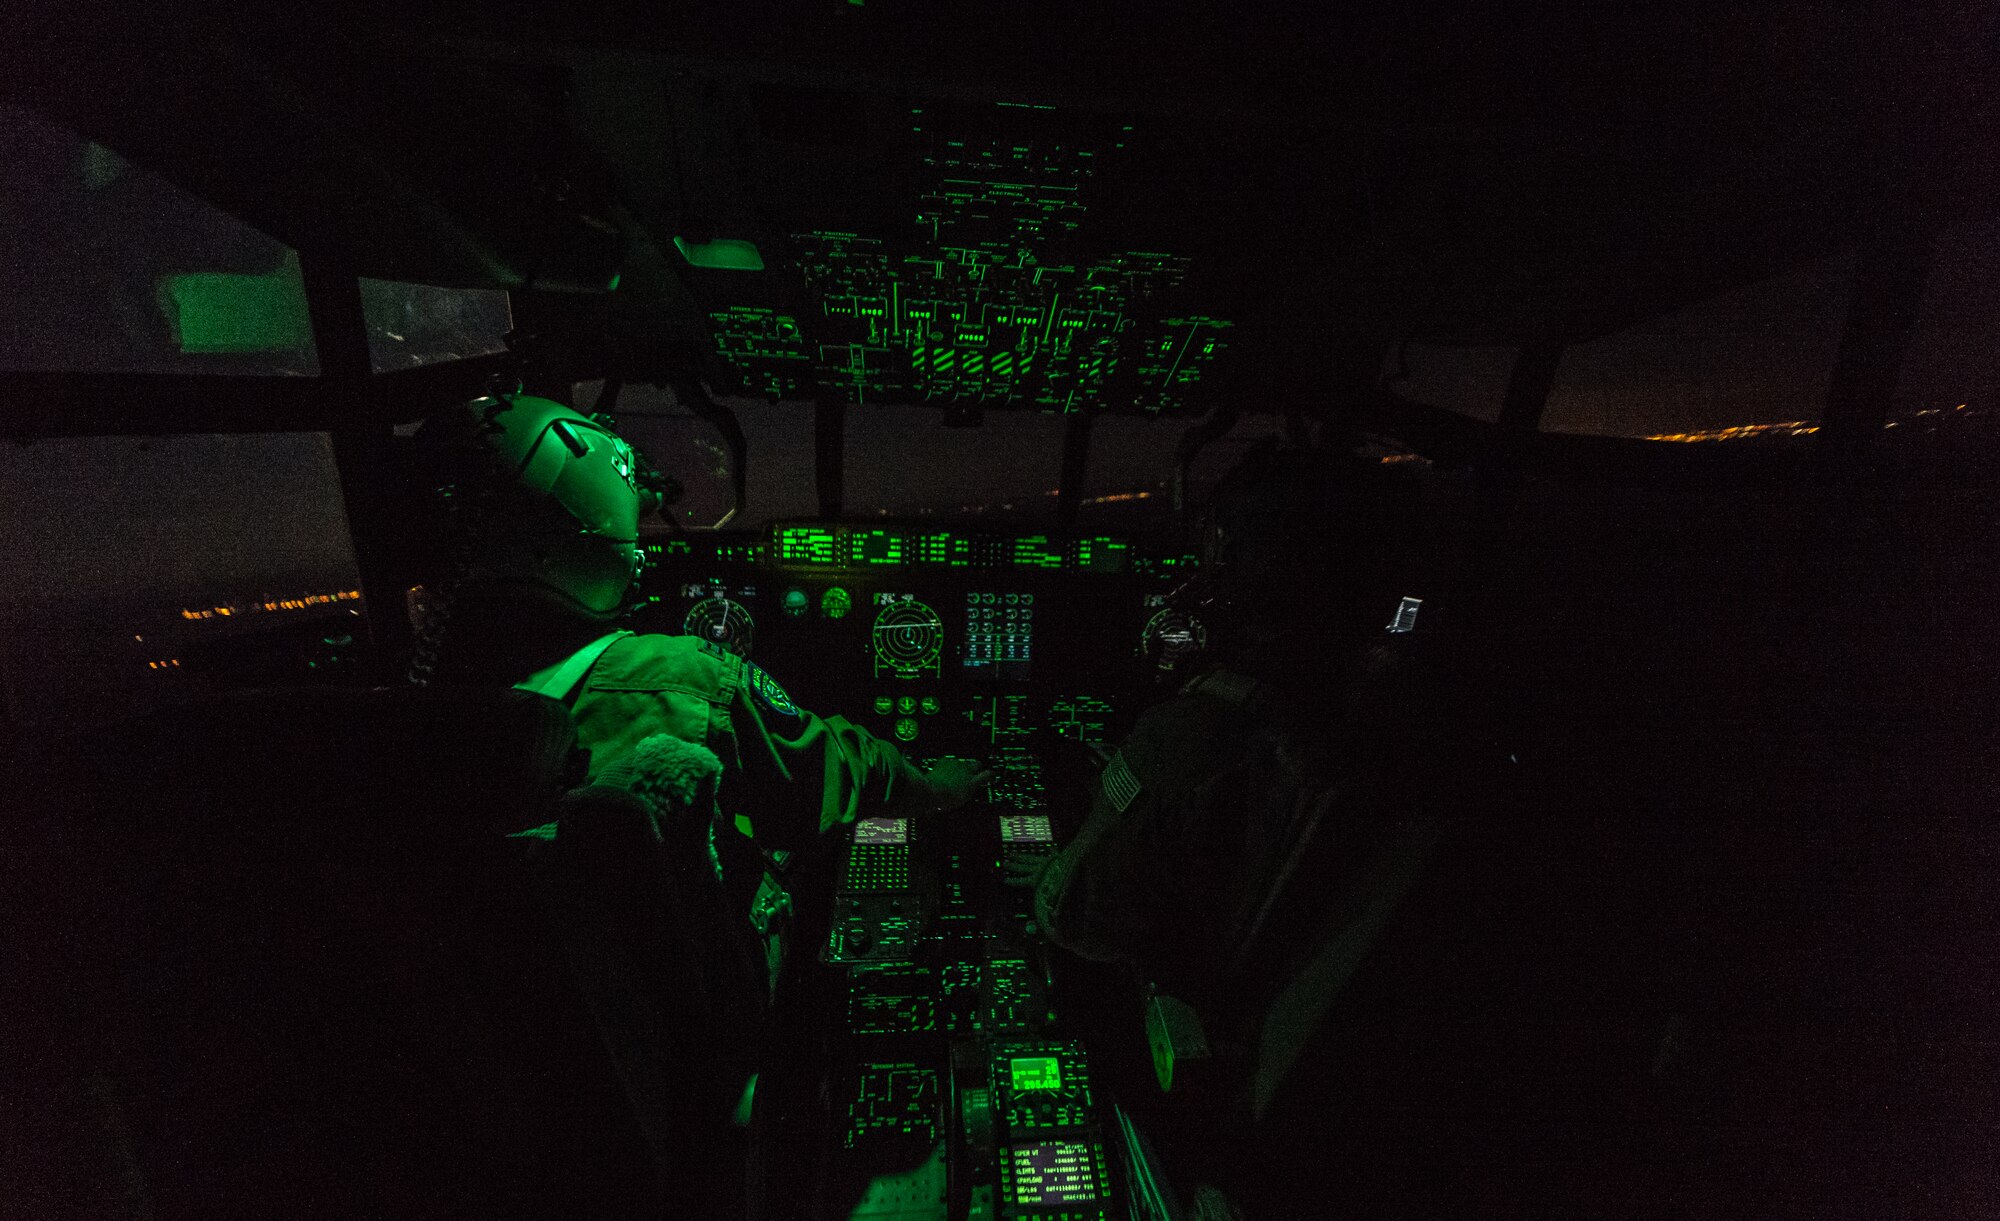 U.S. Air Force Capt. Scott Vander Ploeg, left, and 1st Lt. Trey Cecil, 37th Airlift Squadron pilots fly a 37th AS C-130J Super Hercules during an airdrop of paratroopers from the 1st Battalion, 503rd Infantry Regiment, 173rd Airborne Brigade during exercise Steadfast Javelin II over Lithuania, Sept. 5, 2014. The exercise prepares U.S., NATO Allies and European security partners to conduct unified land operations through the simultaneous combination of offensive, defensive, and stability operations appropriate to the mission and the environment, and to sustain interoperability with partner nations. (U.S. Air Force photo/Airman 1st Class Jordan Castelan)